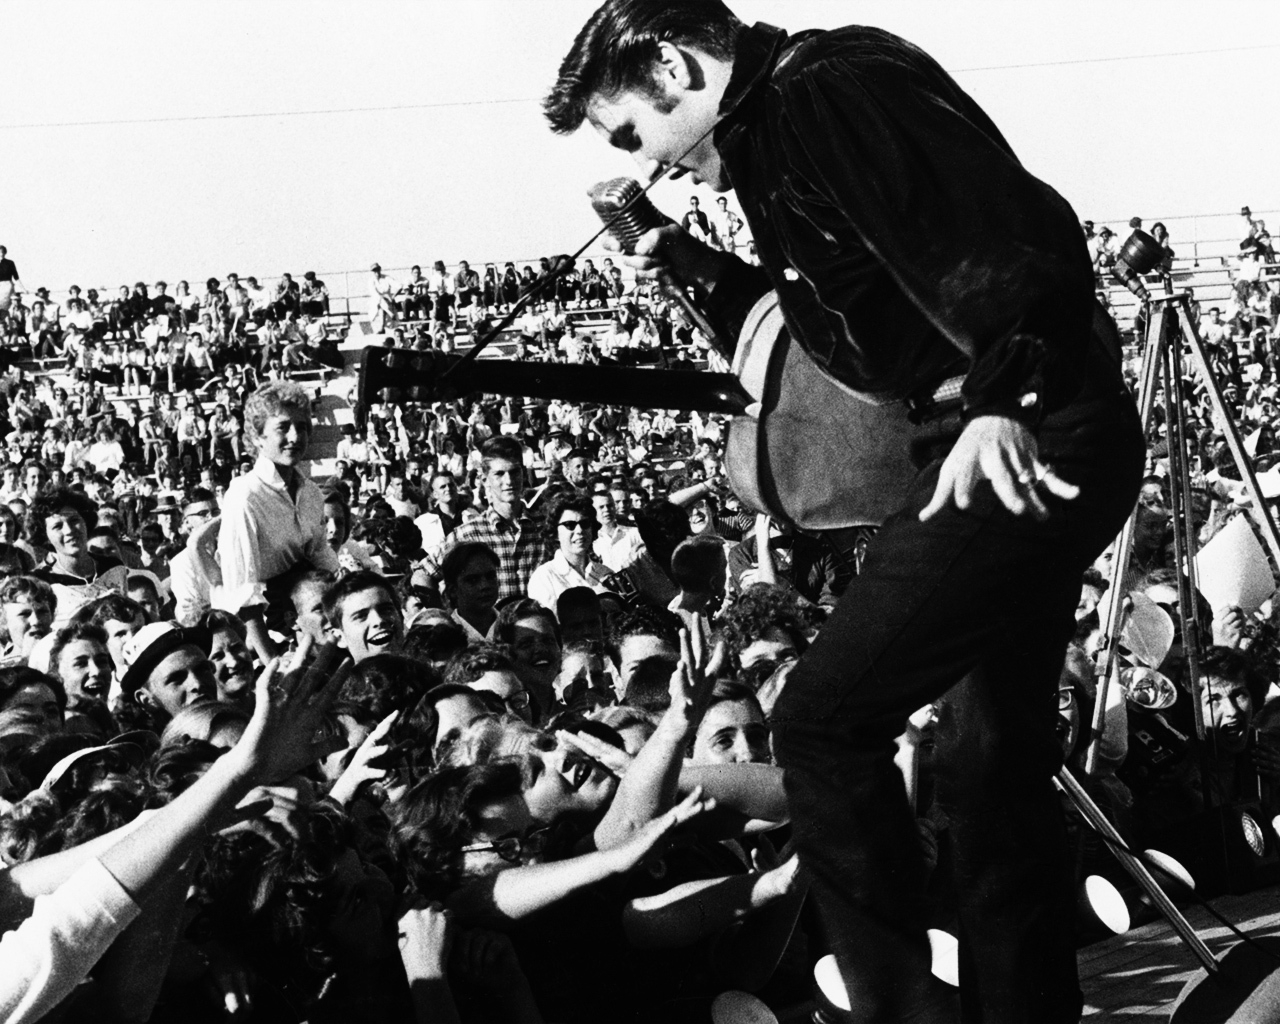 Elvis Presley on The Stage for 1280 x 1024 resolution